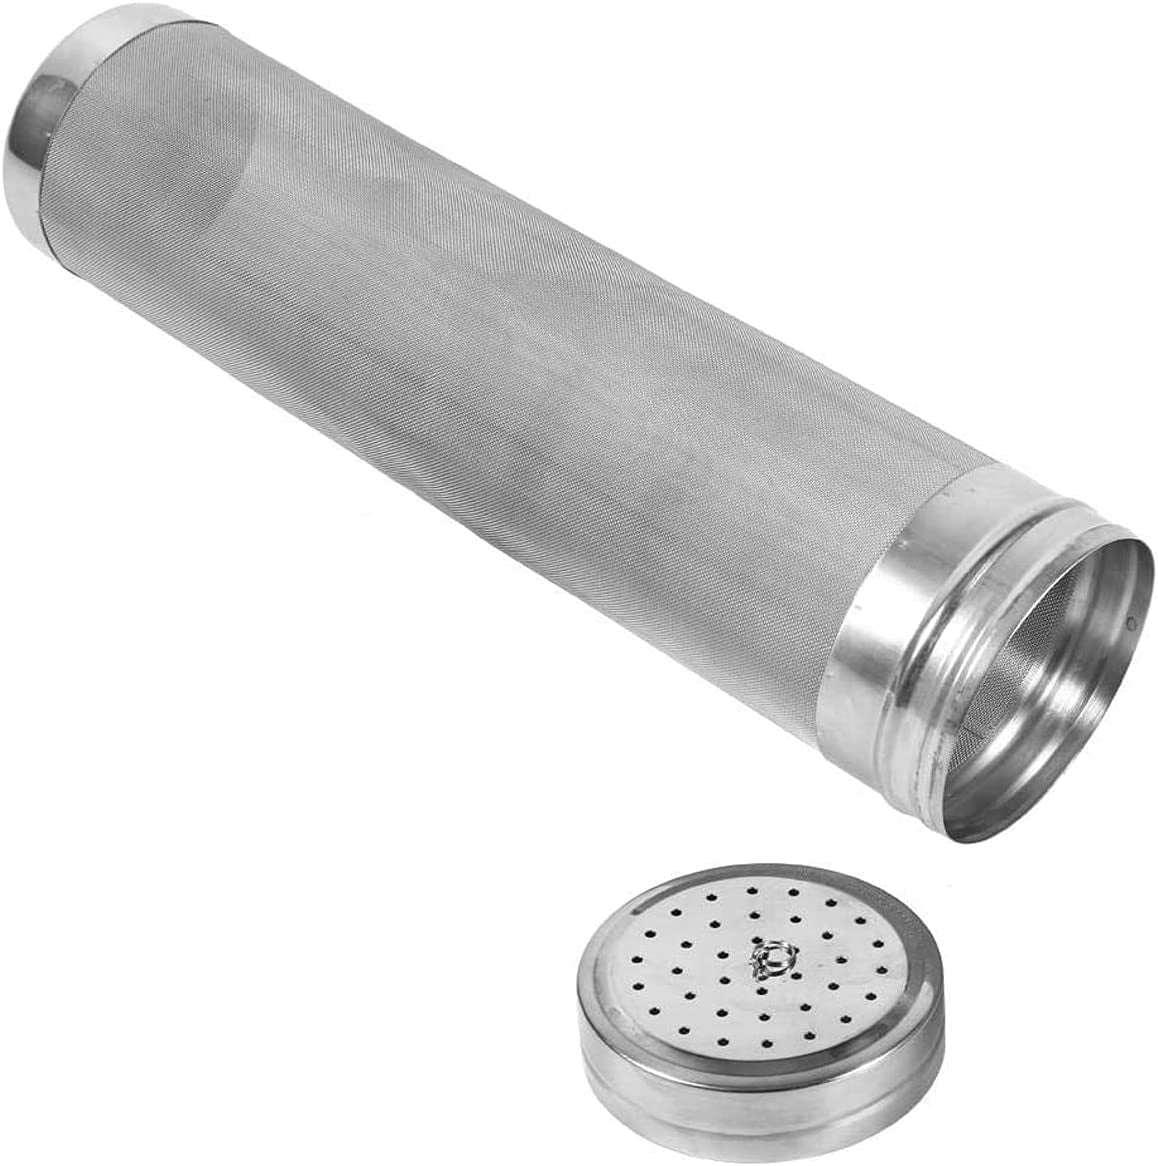 Beer Dry Hopper Filter,300 Micron Filter Stainless Steel Mesh Cornelius Keg for Home Beer Brewing Kettle (2.8 X 11.8 Inch)